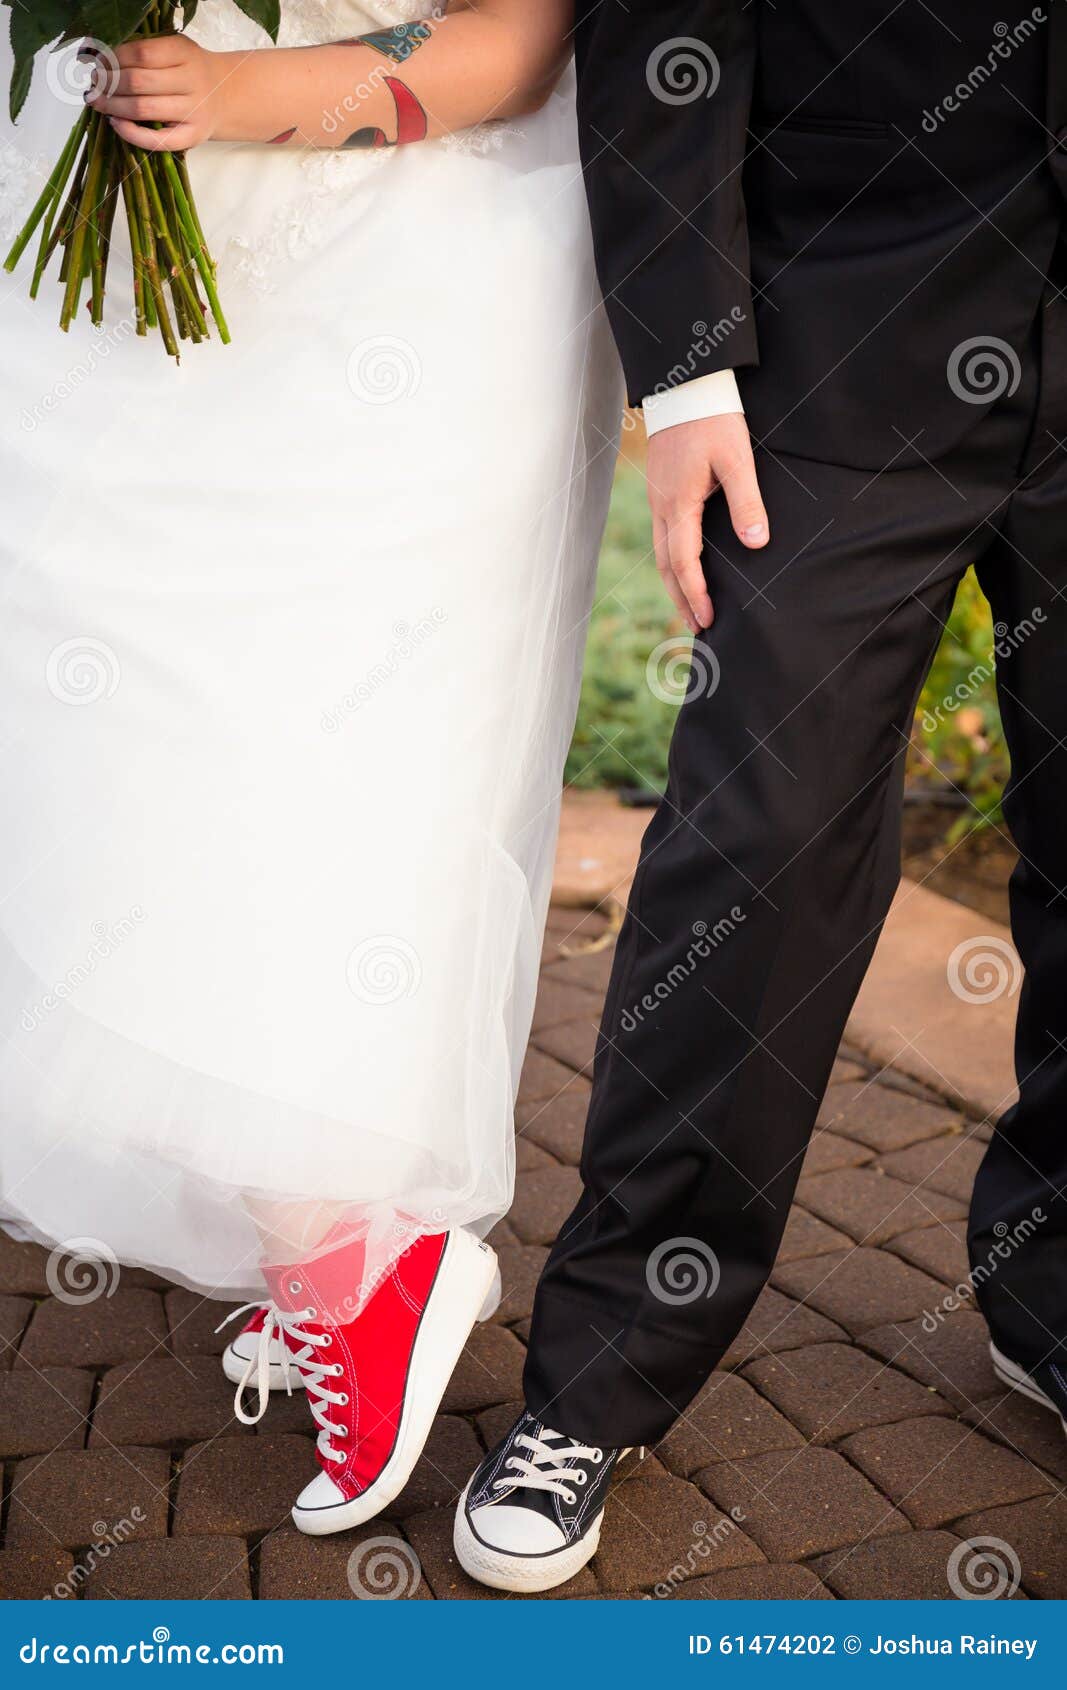 wearing converse on wedding day